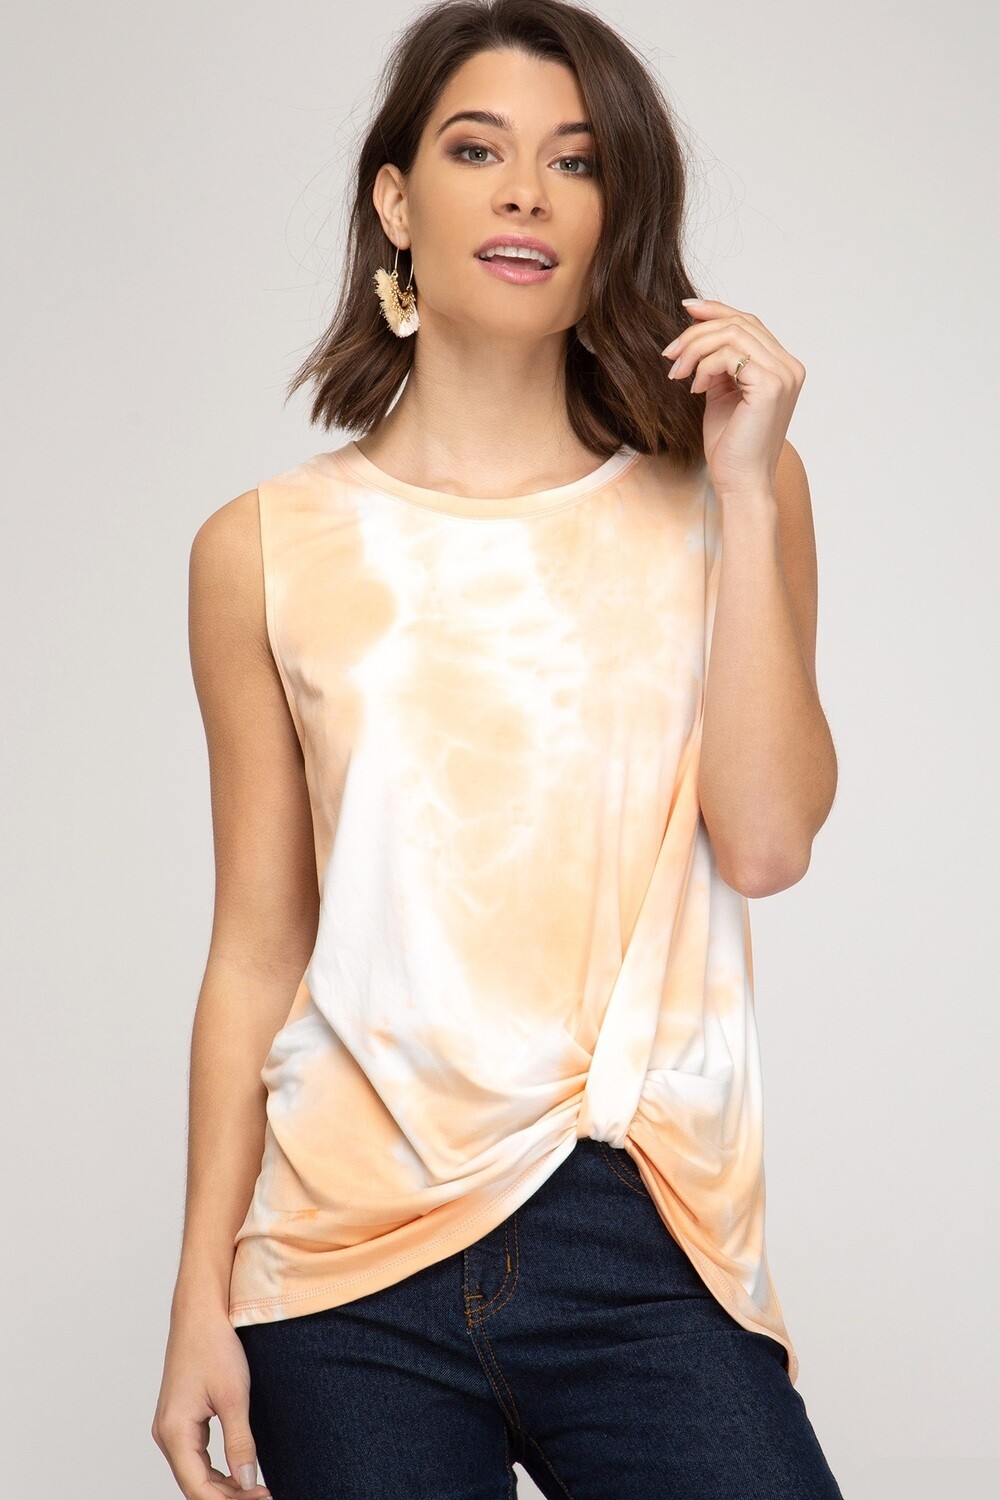 Simple Days Top